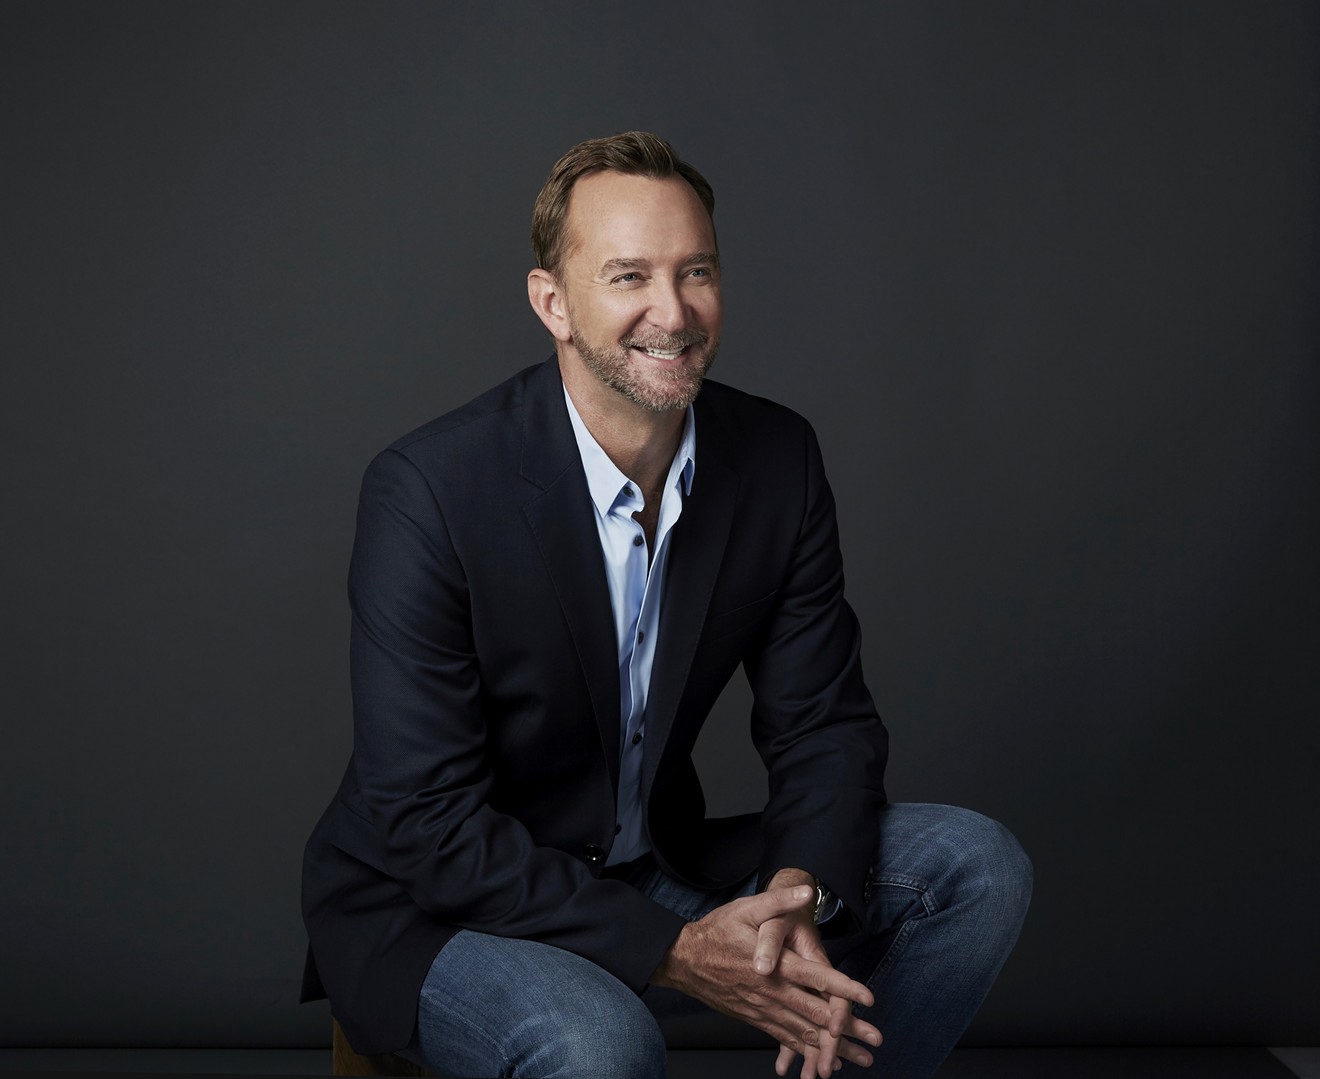 Best-selling author and television personality Clinton Kelly signs copies of his new memoir, I Hate Everyone, Except You, at Changing Hands Bookstore's Phoenix location on Thursday, Jan. 12.